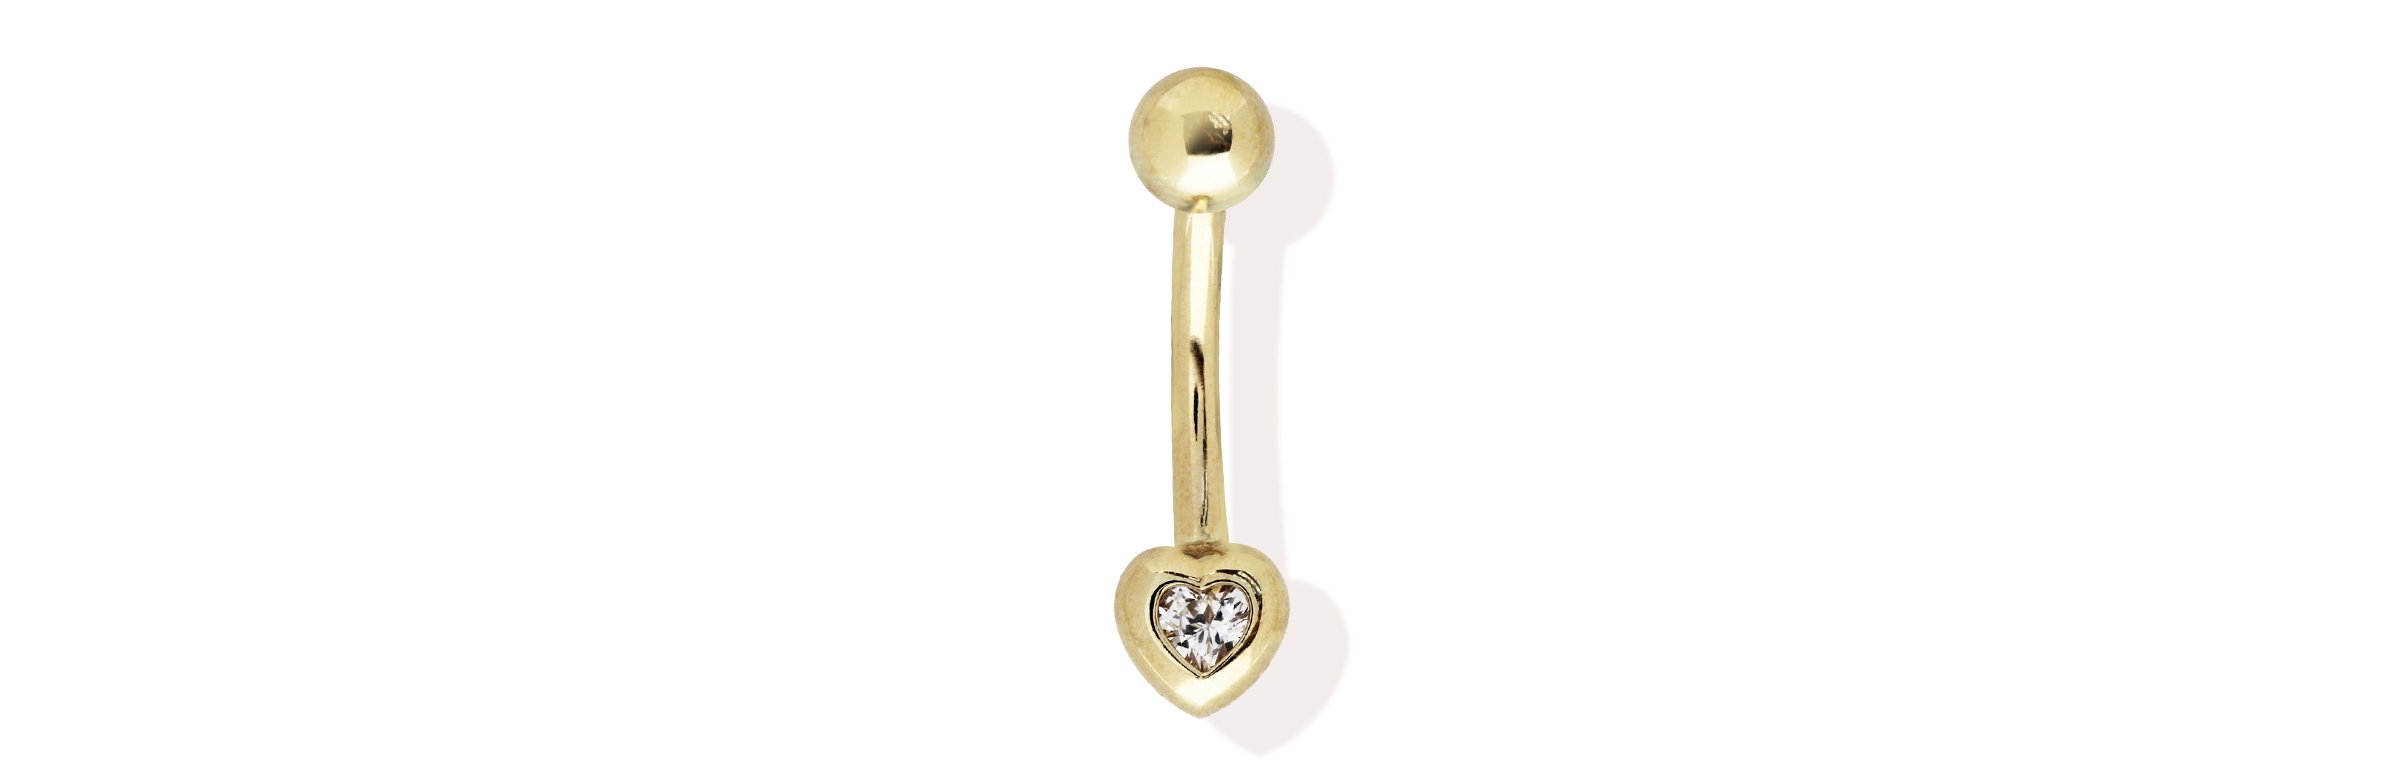 Upside Down Heart Belly Button Ring Y2K 2000s Sparkly Body 